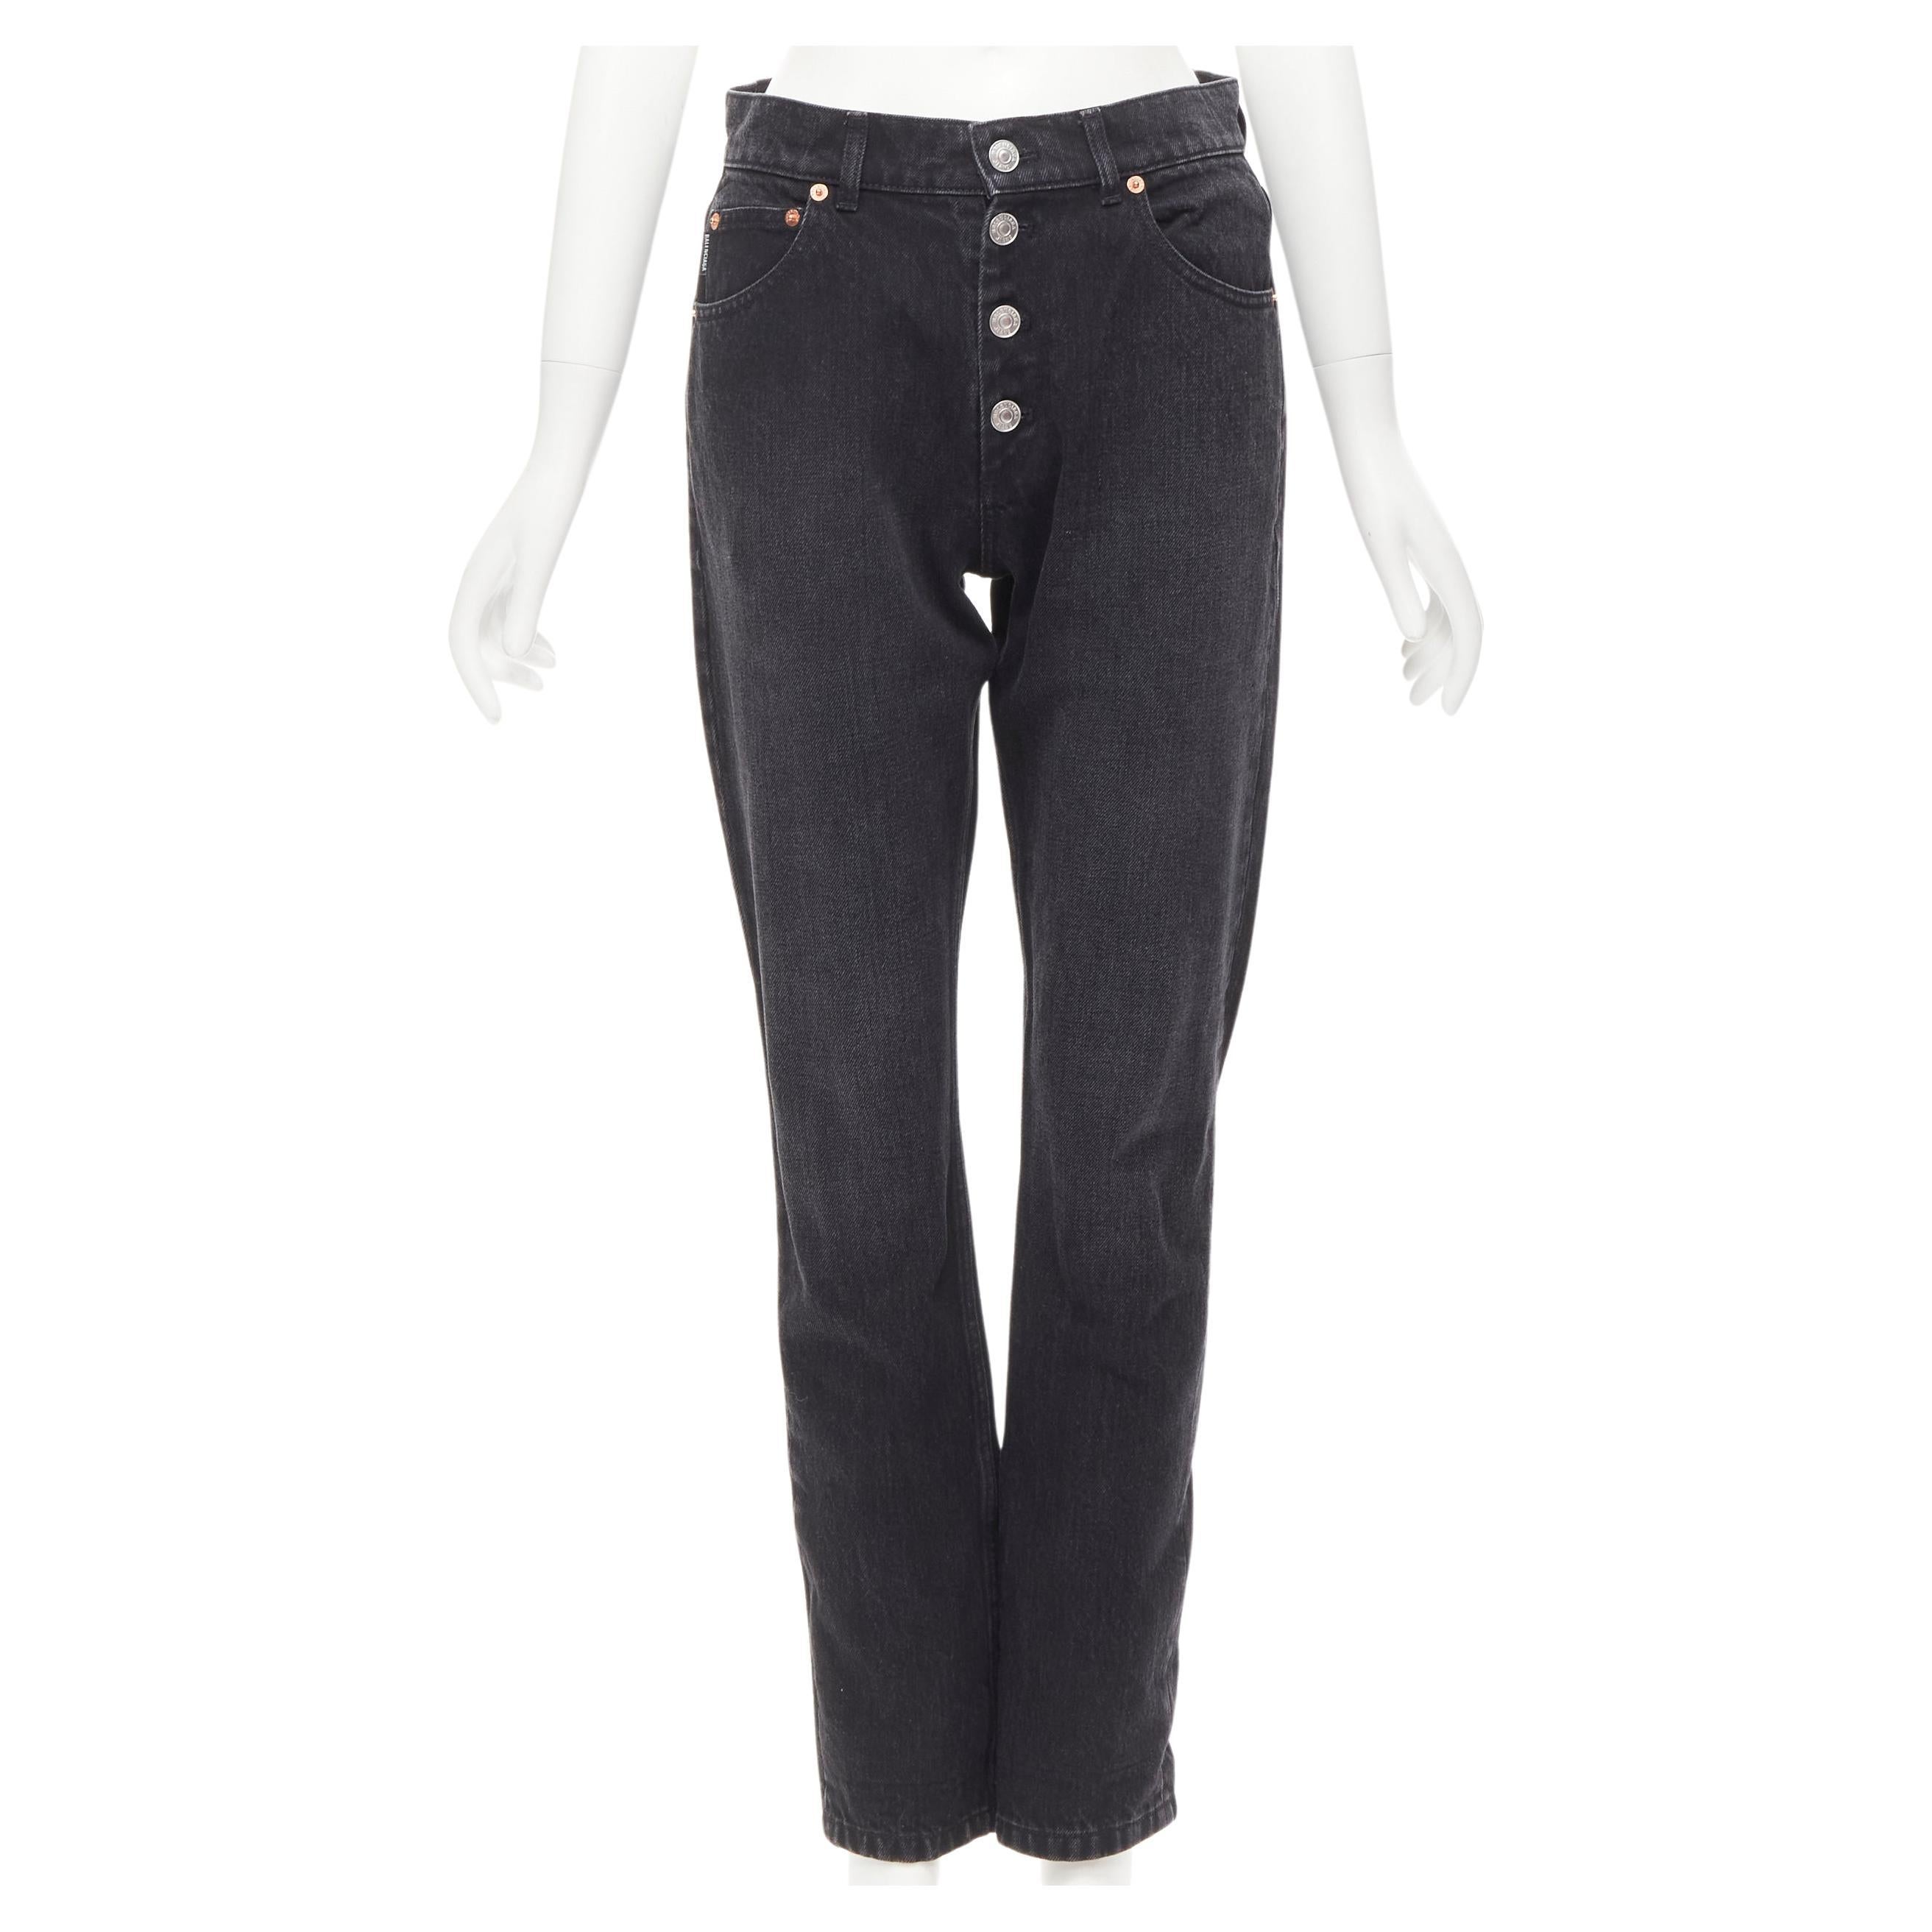 BALENCIAGA black washed denim exposed buttons 5-pocket high waisted jeans 28" For Sale